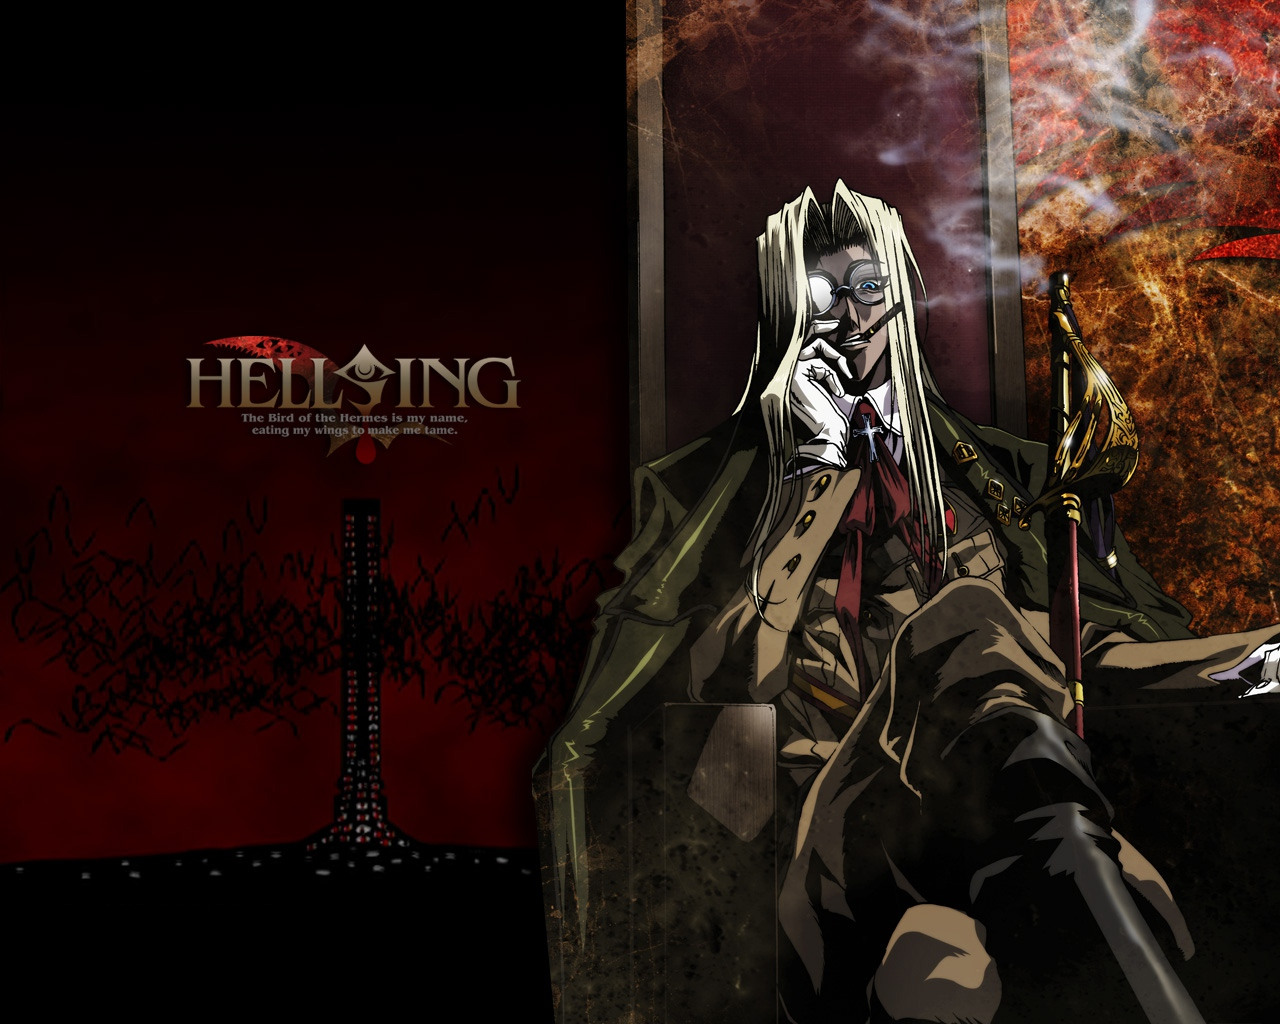 Hellsing's Most Human Character Is the Vampire Alucard